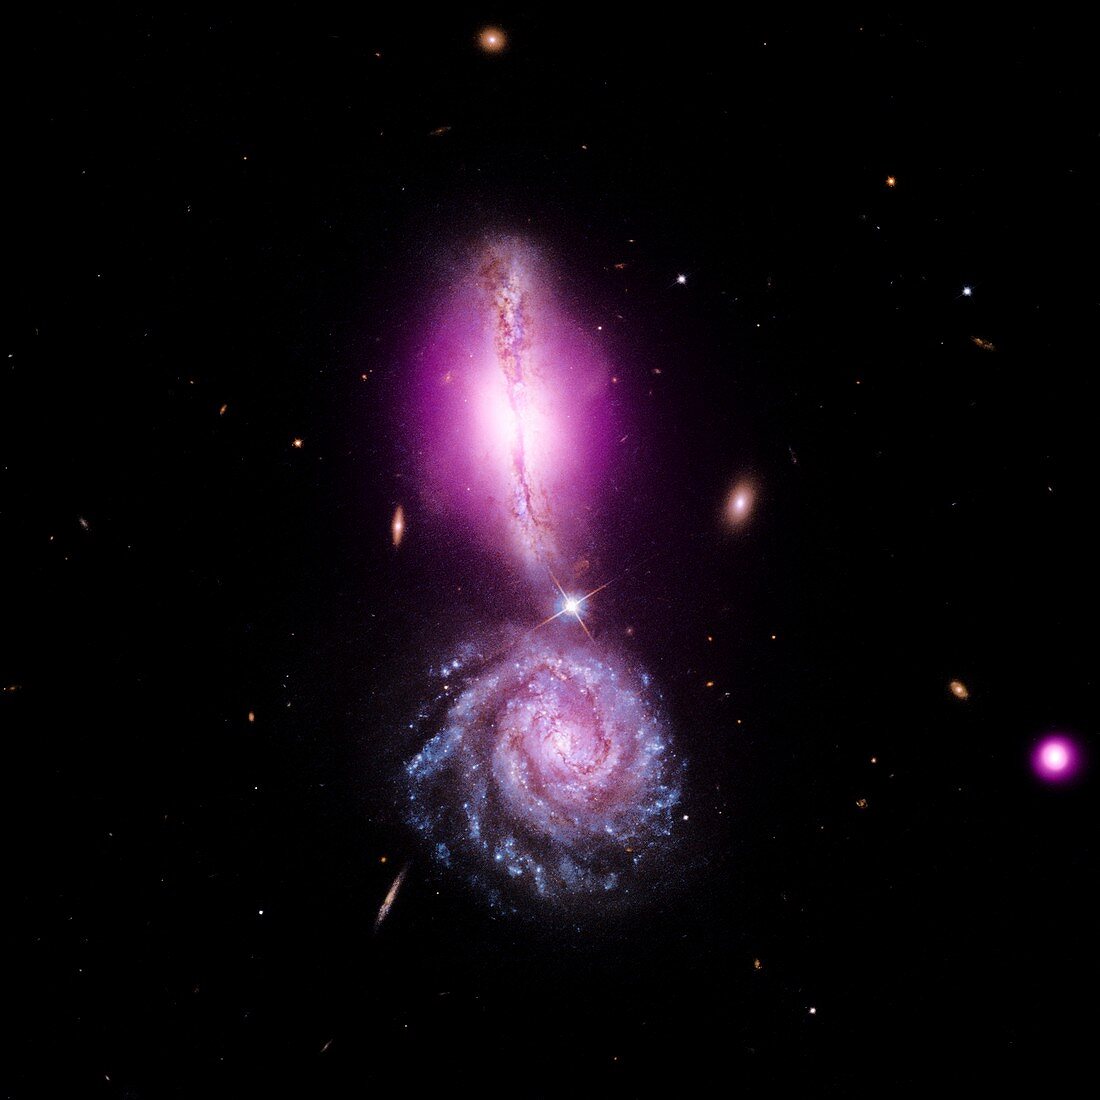 Colliding galaxies,space telescope image